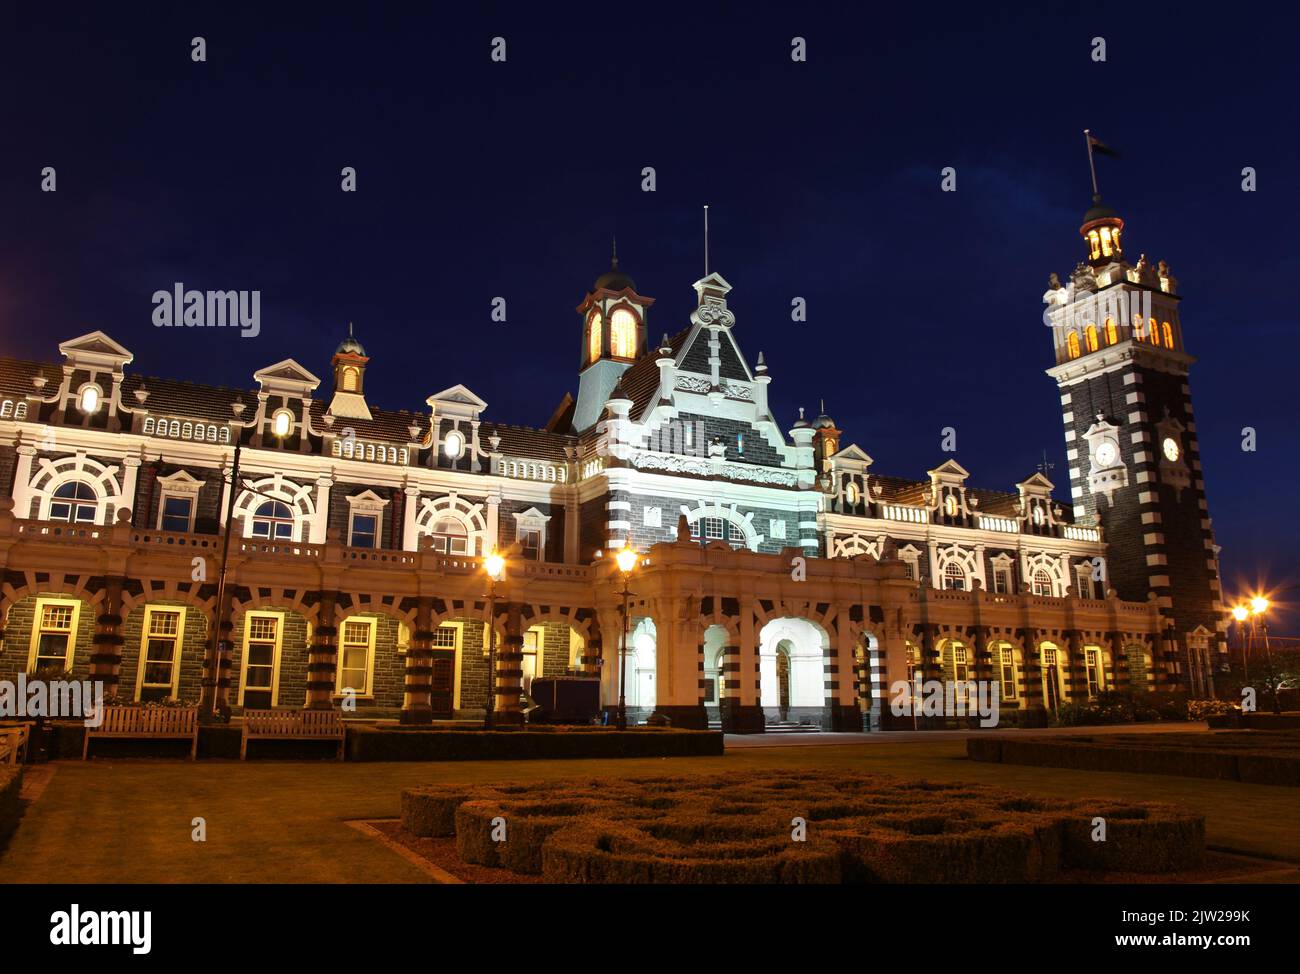 Dunedin's famous historic railway station at nightime. - Dunedin New Zealand. This ornate Flemish Renaissance-style building was opened in 1906 and is Stock Photo